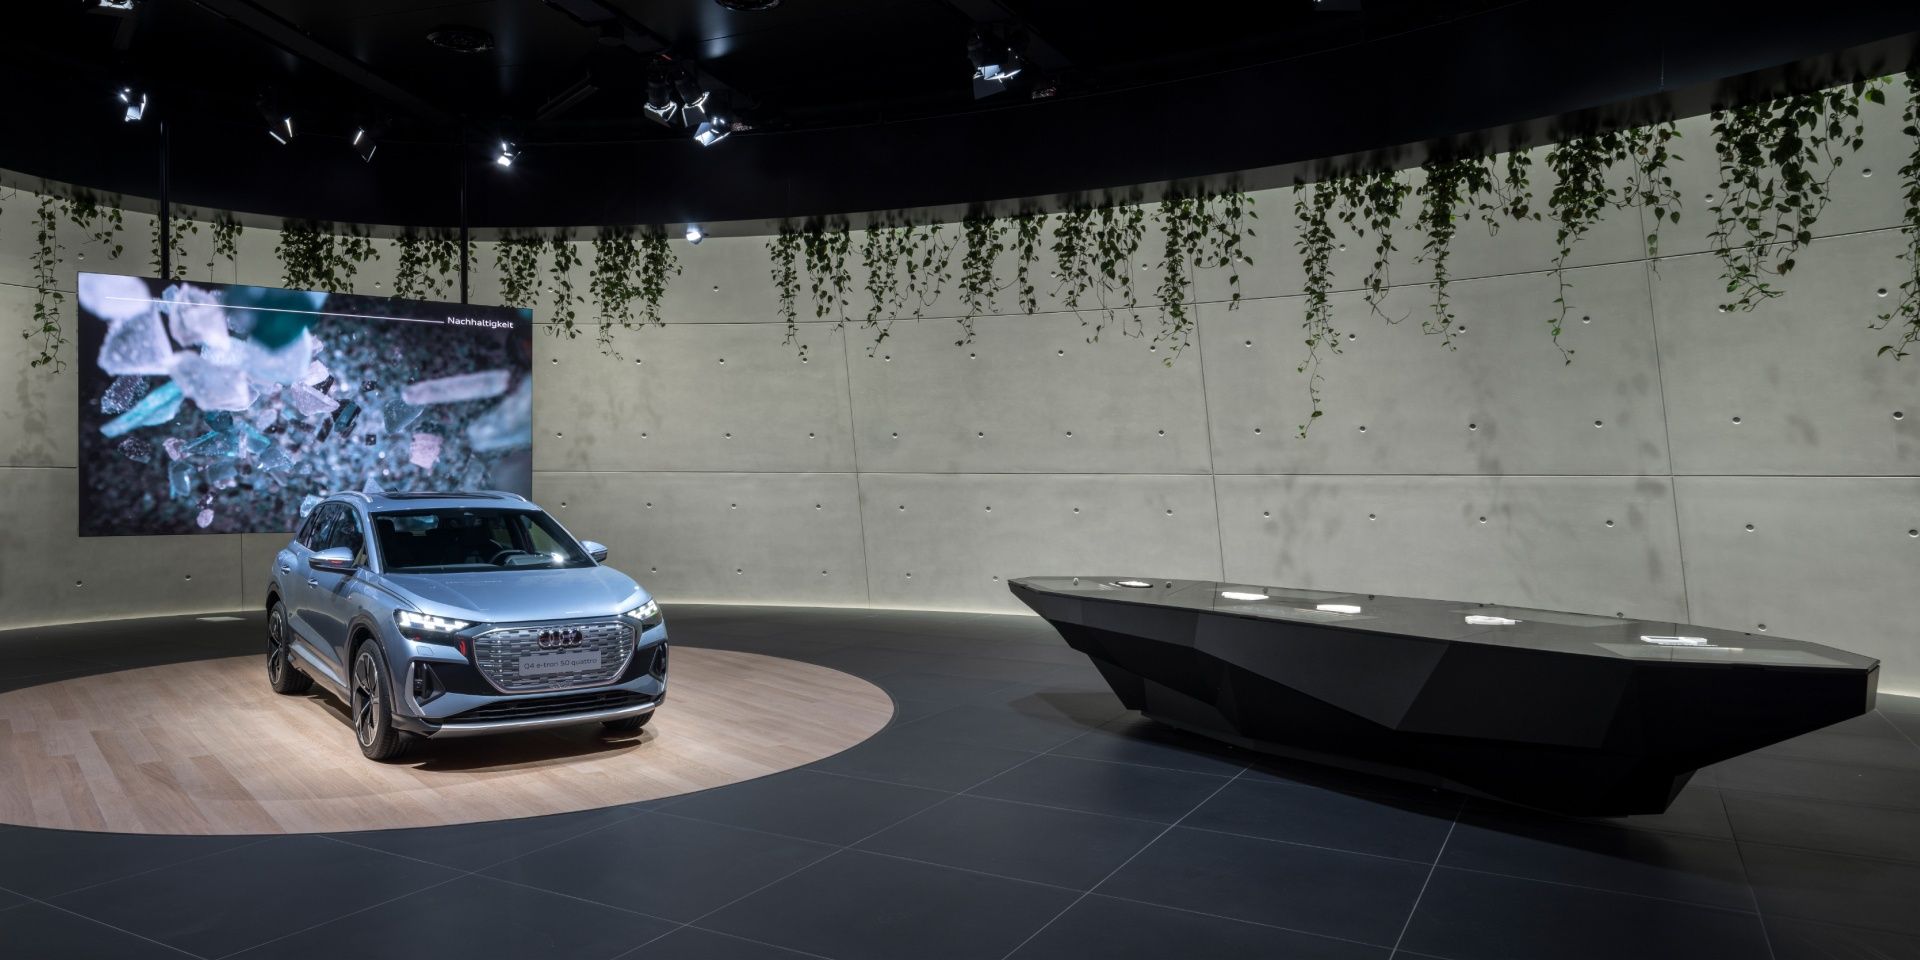 The Audi Q4 e-tron and a projection on sustainability. Next to them the information desk.